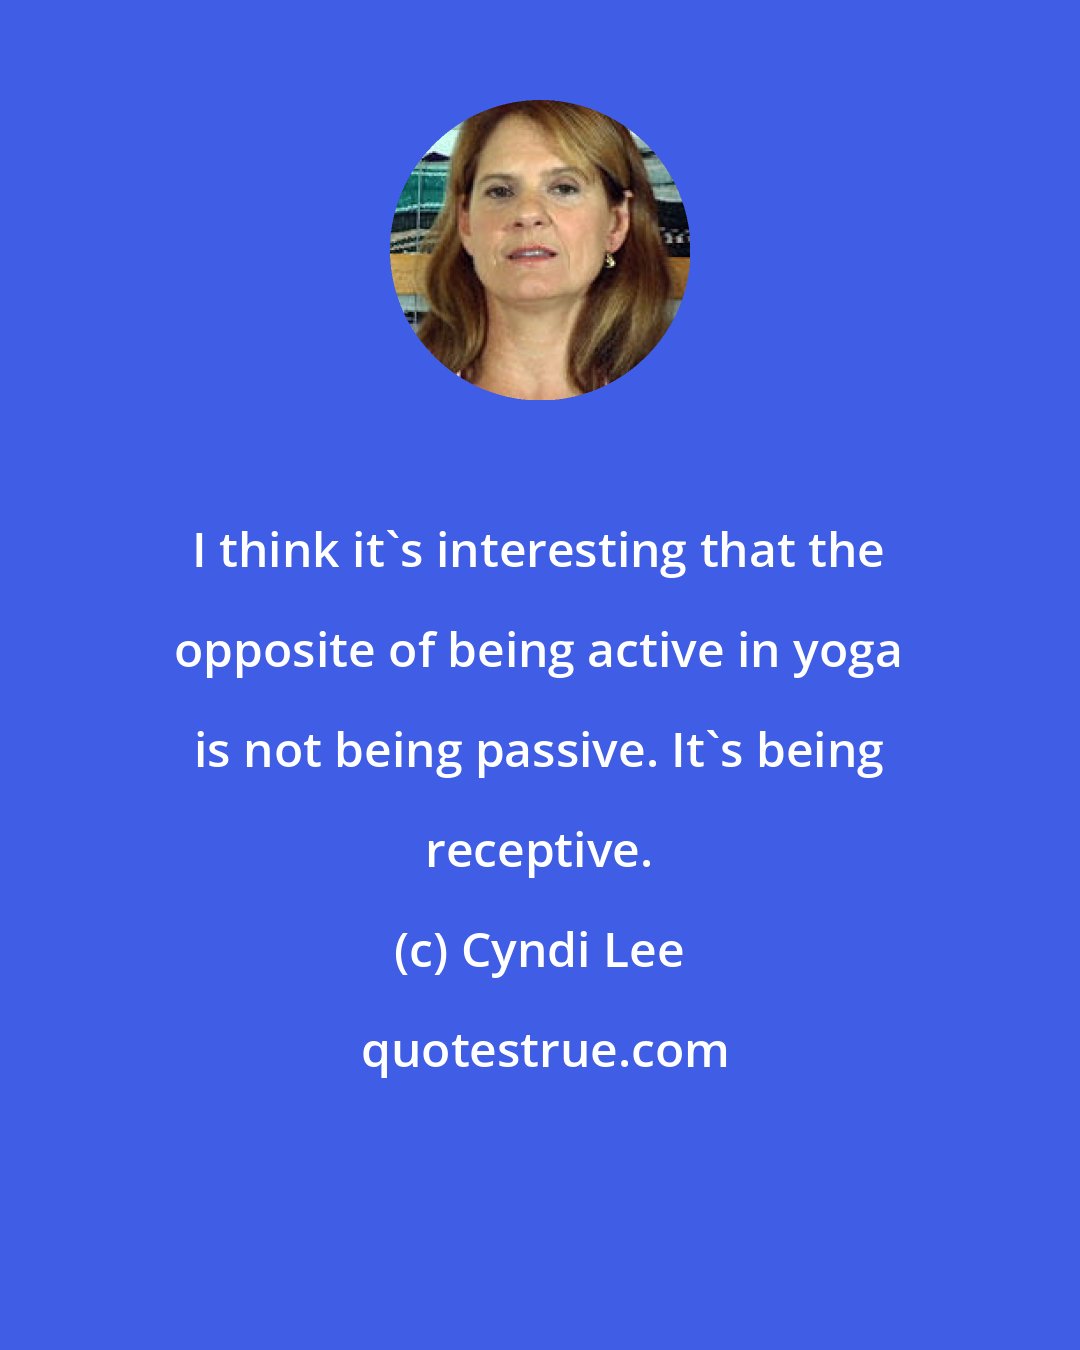 Cyndi Lee: I think it's interesting that the opposite of being active in yoga is not being passive. It's being receptive.